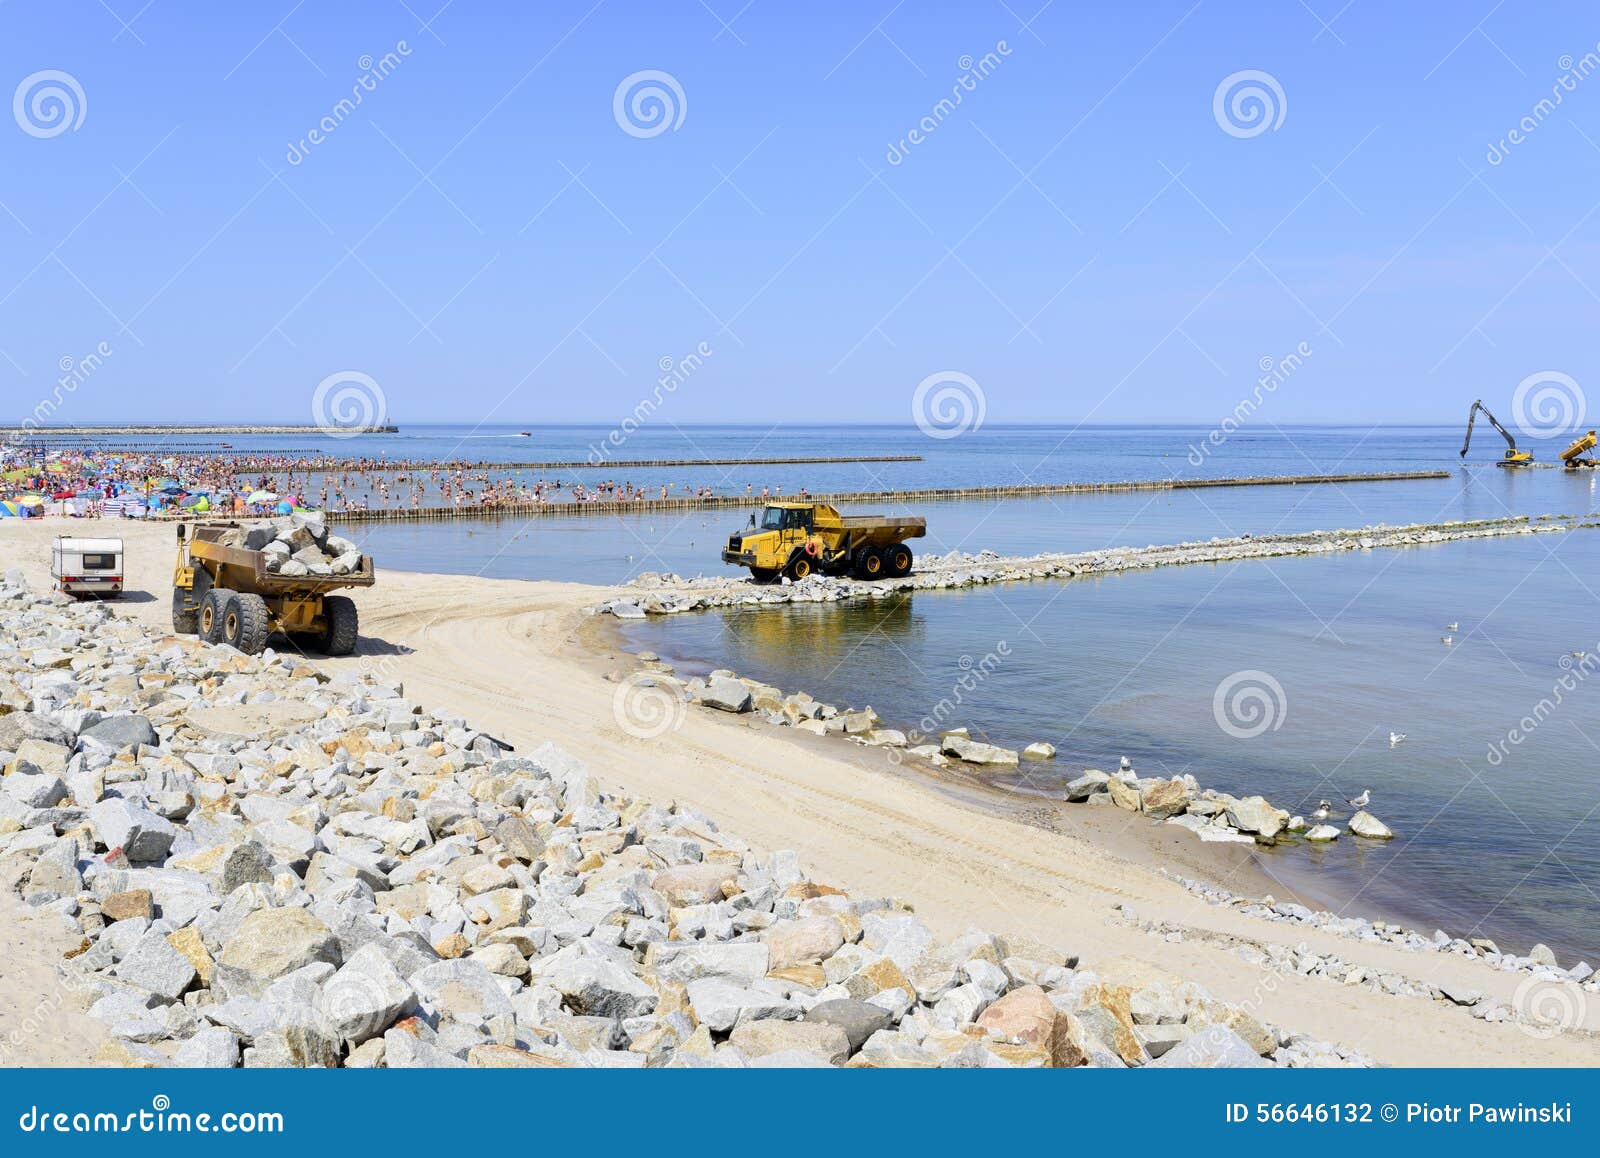 The Beach Under Construction. Editorial Photography - Image of ocean ...